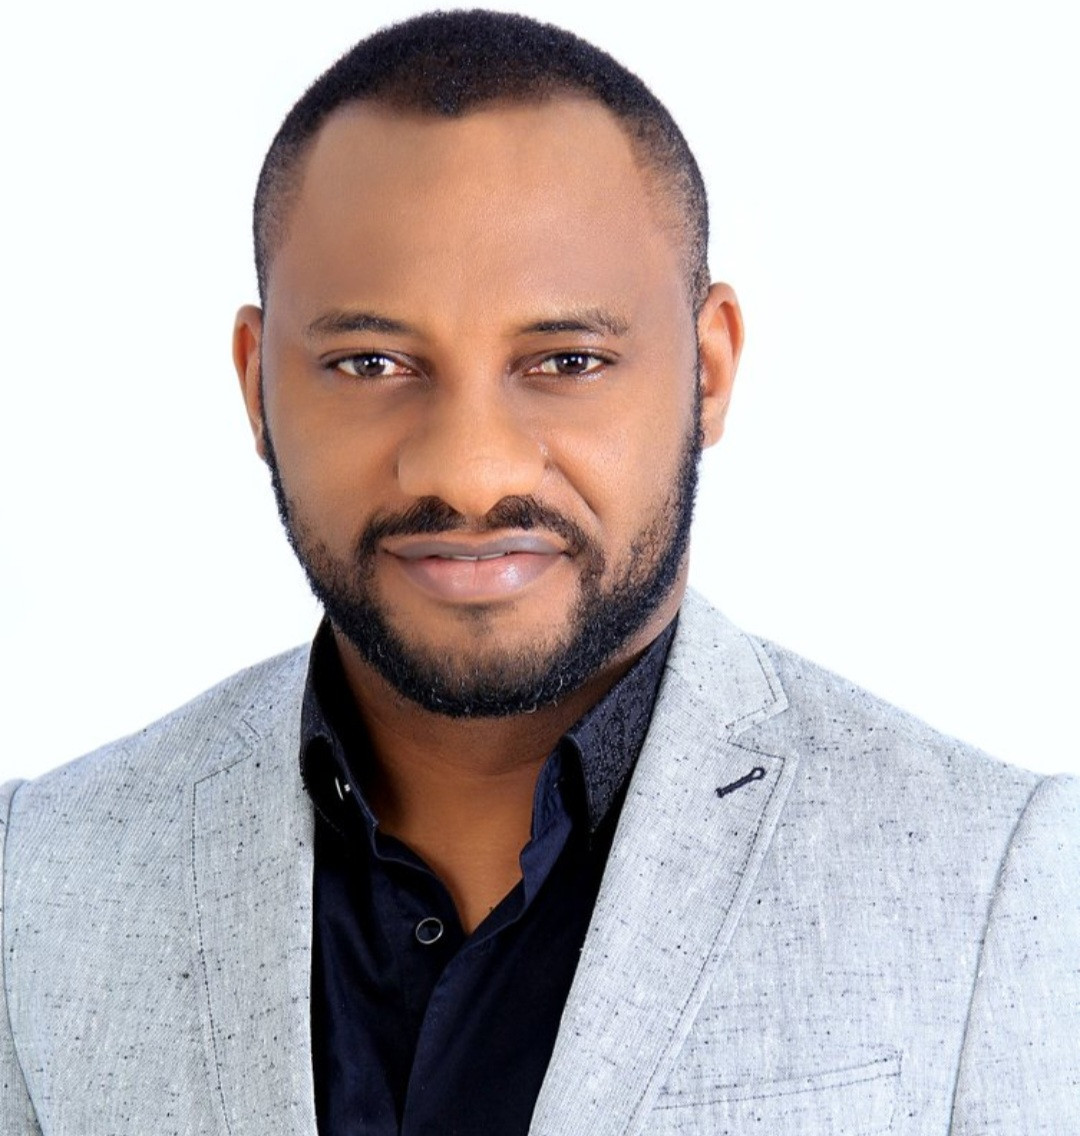 "Policemen have never harassed me" - Yul Edochie advises Nigerians on how they can avoid getting